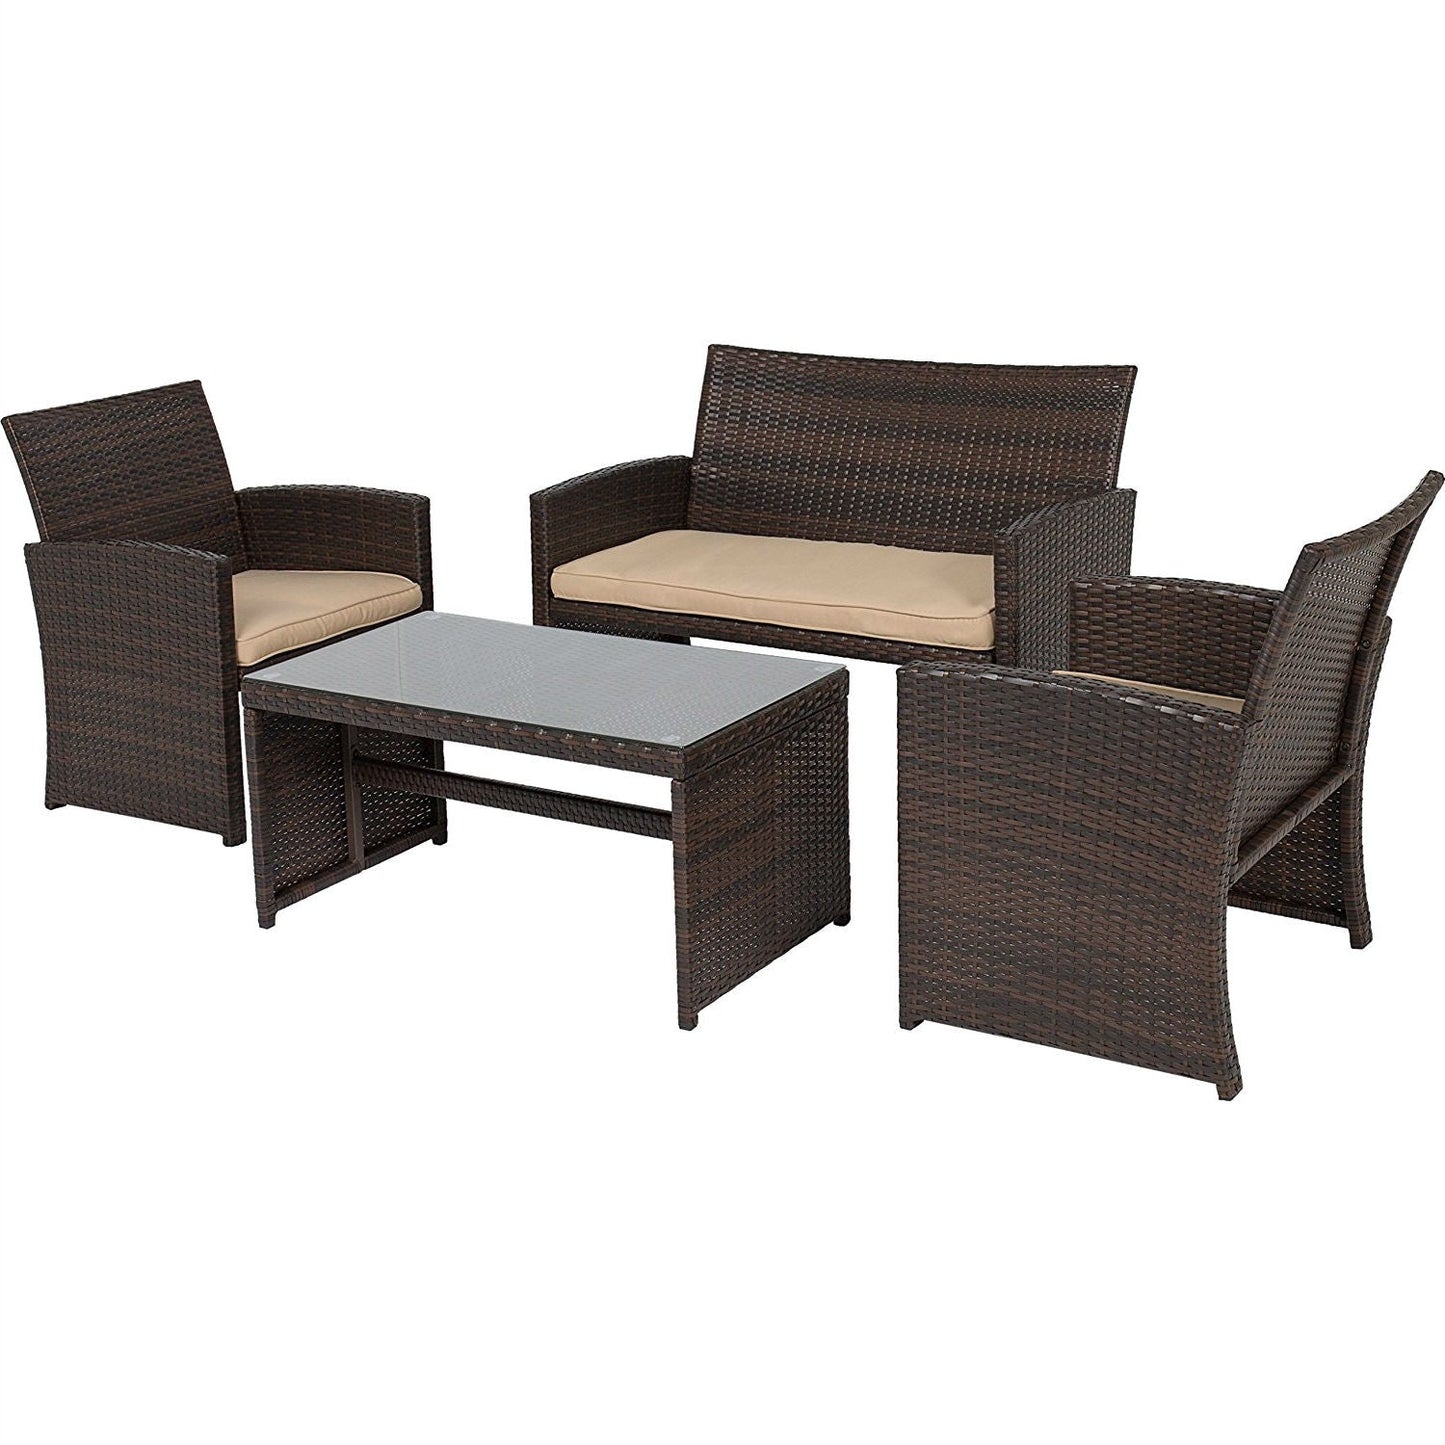 Outdoor > Outdoor Furniture > Patio Furniture Sets - Rectangle 59 X 31-inch Solid Wood Patio Dining Table With Center Umbrella Hole